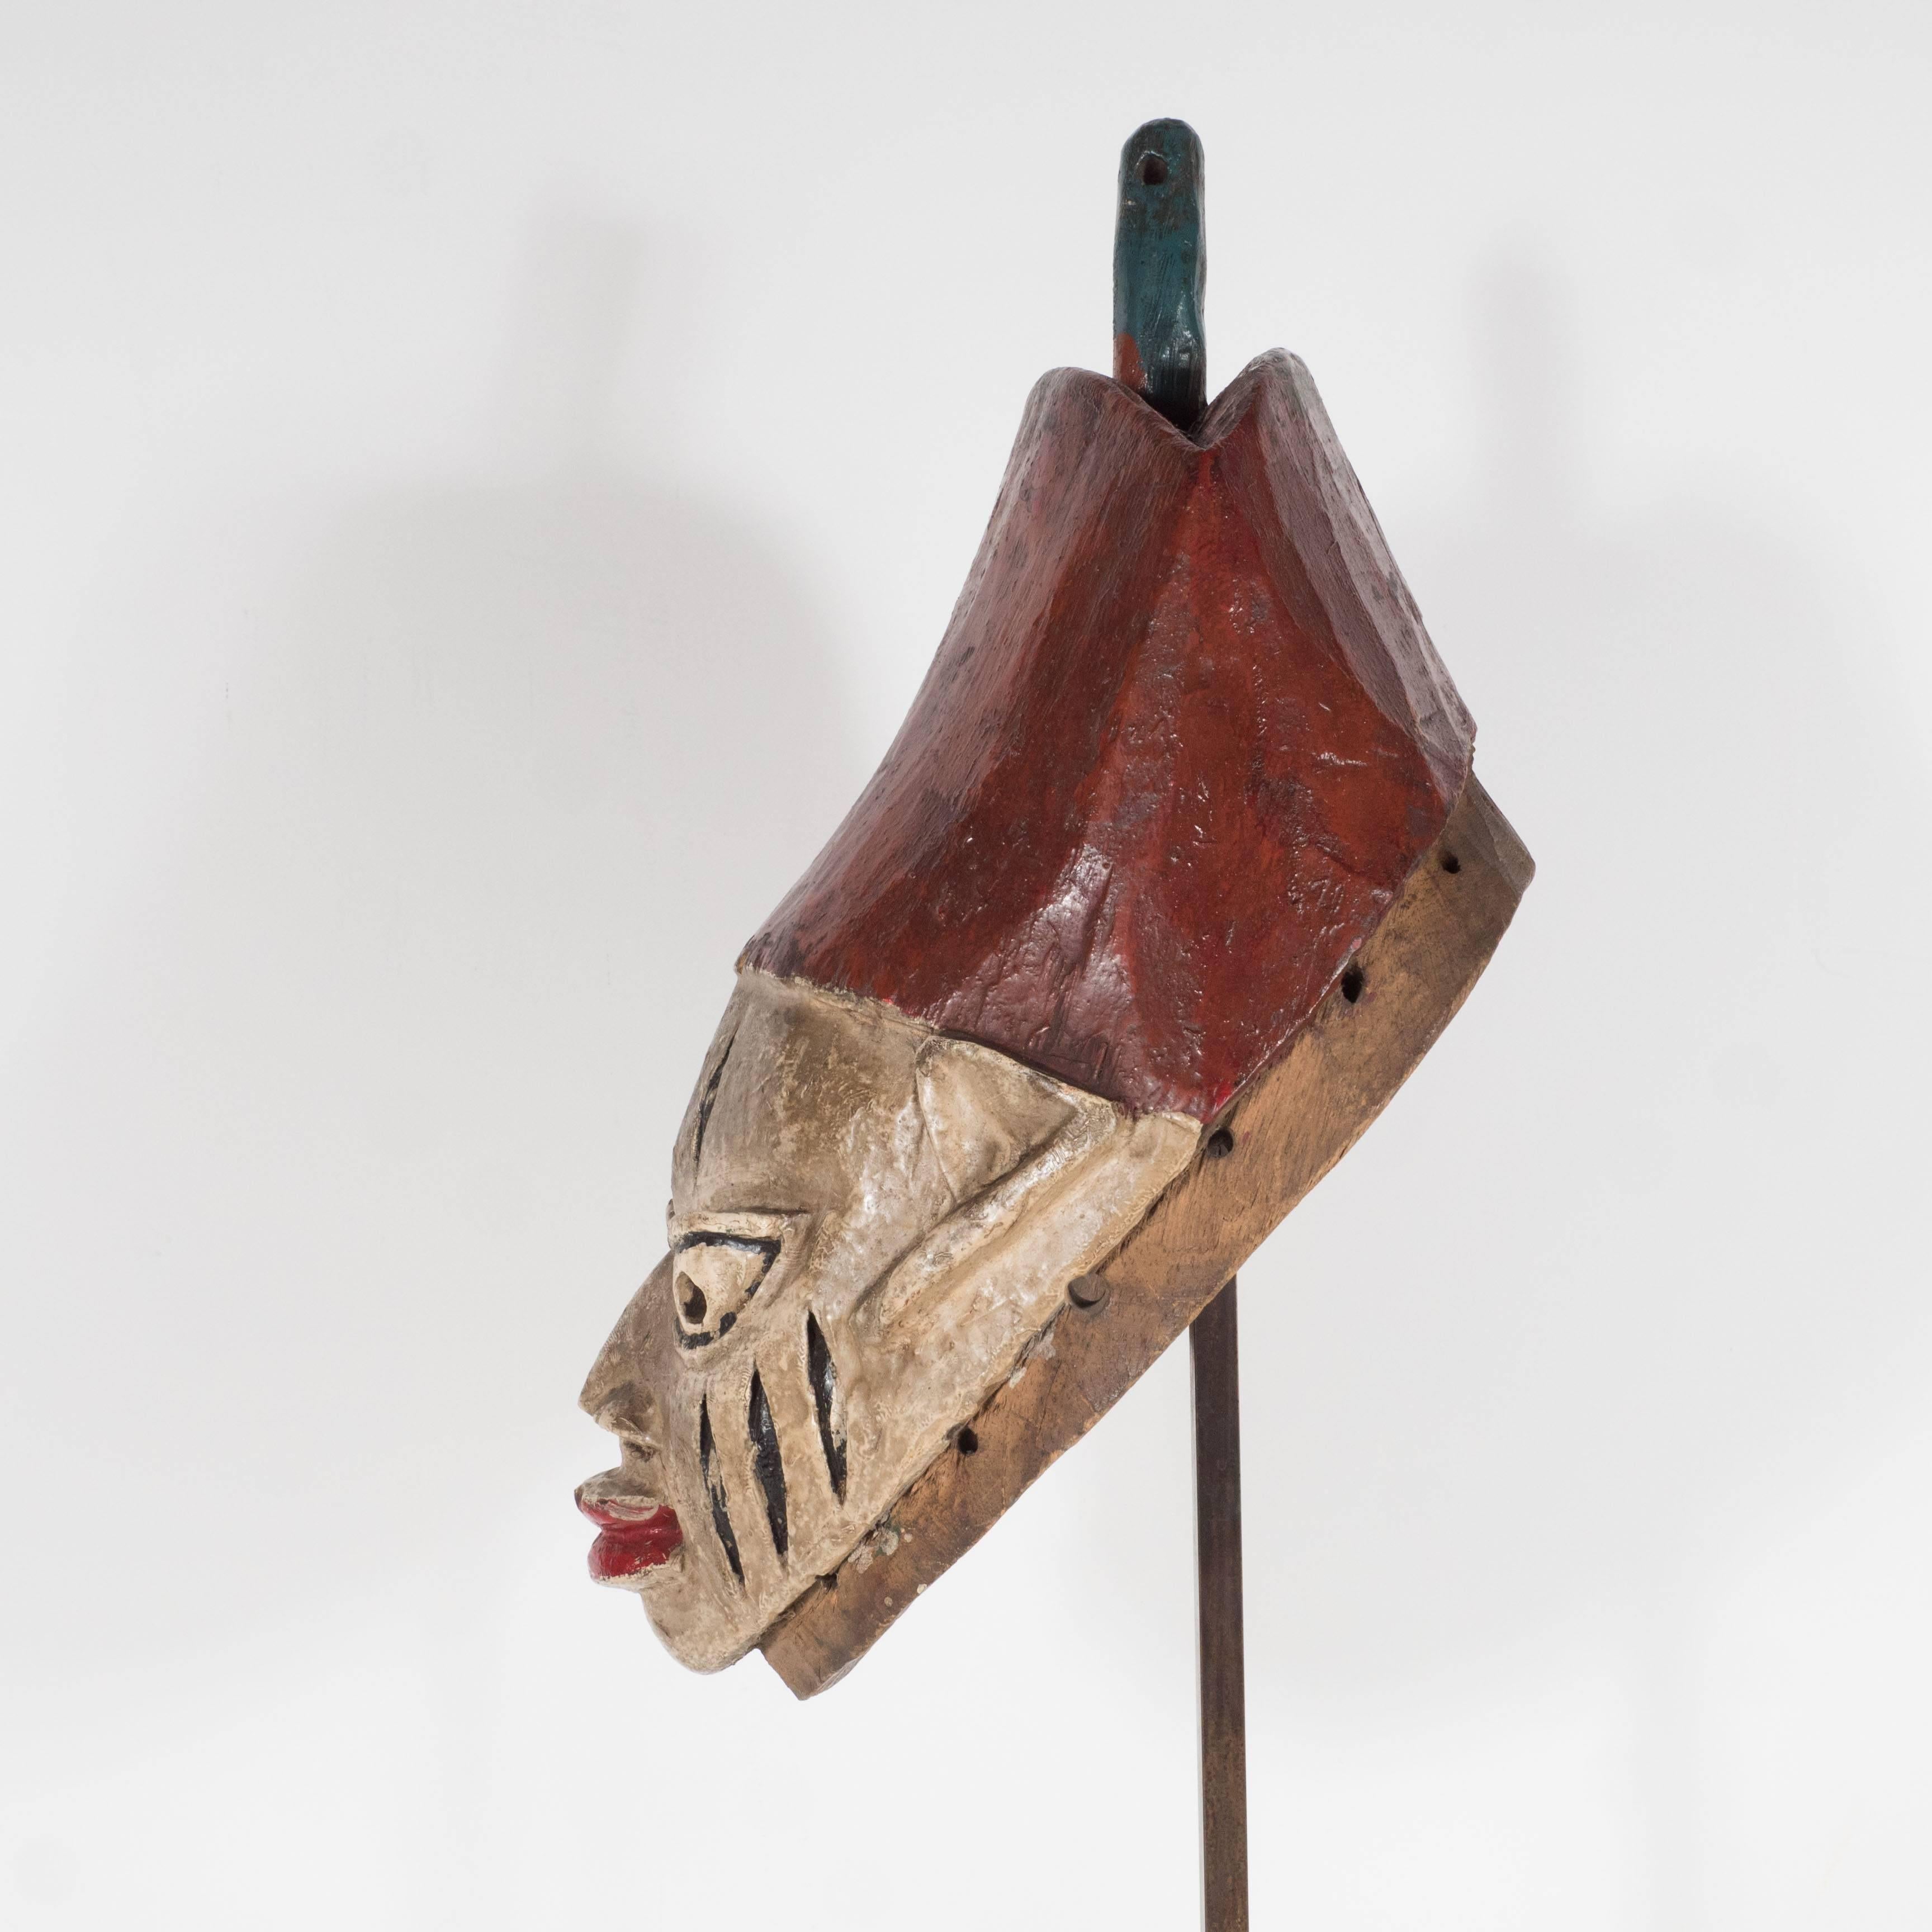 Painted Head Crest Mask on Mount, Probably Yoruba, Nigeria, 20th Century - Tribal Sculpture by Unknown